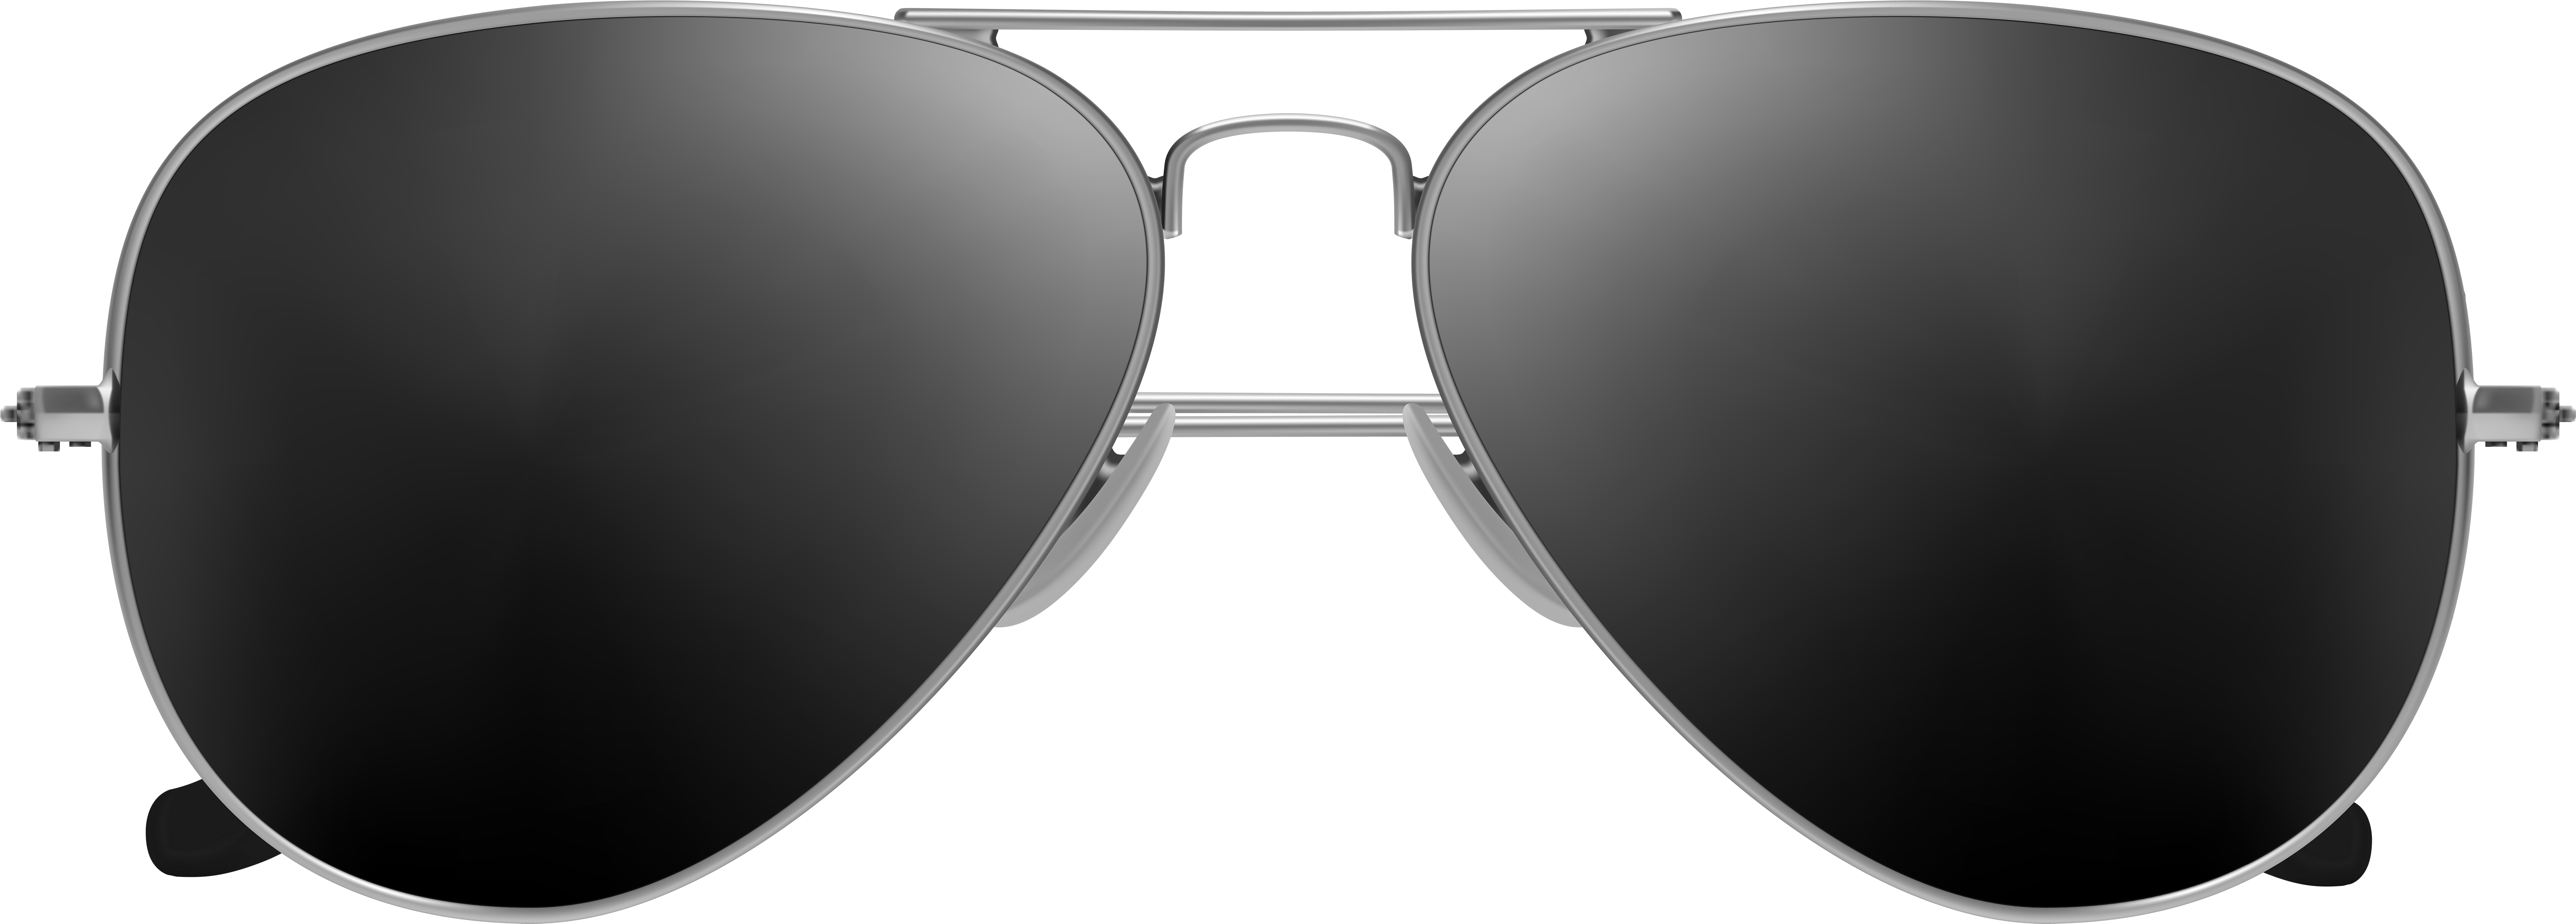 Free Aviators Png, Download Free Aviators Png Png Images, Free ClipArts ...